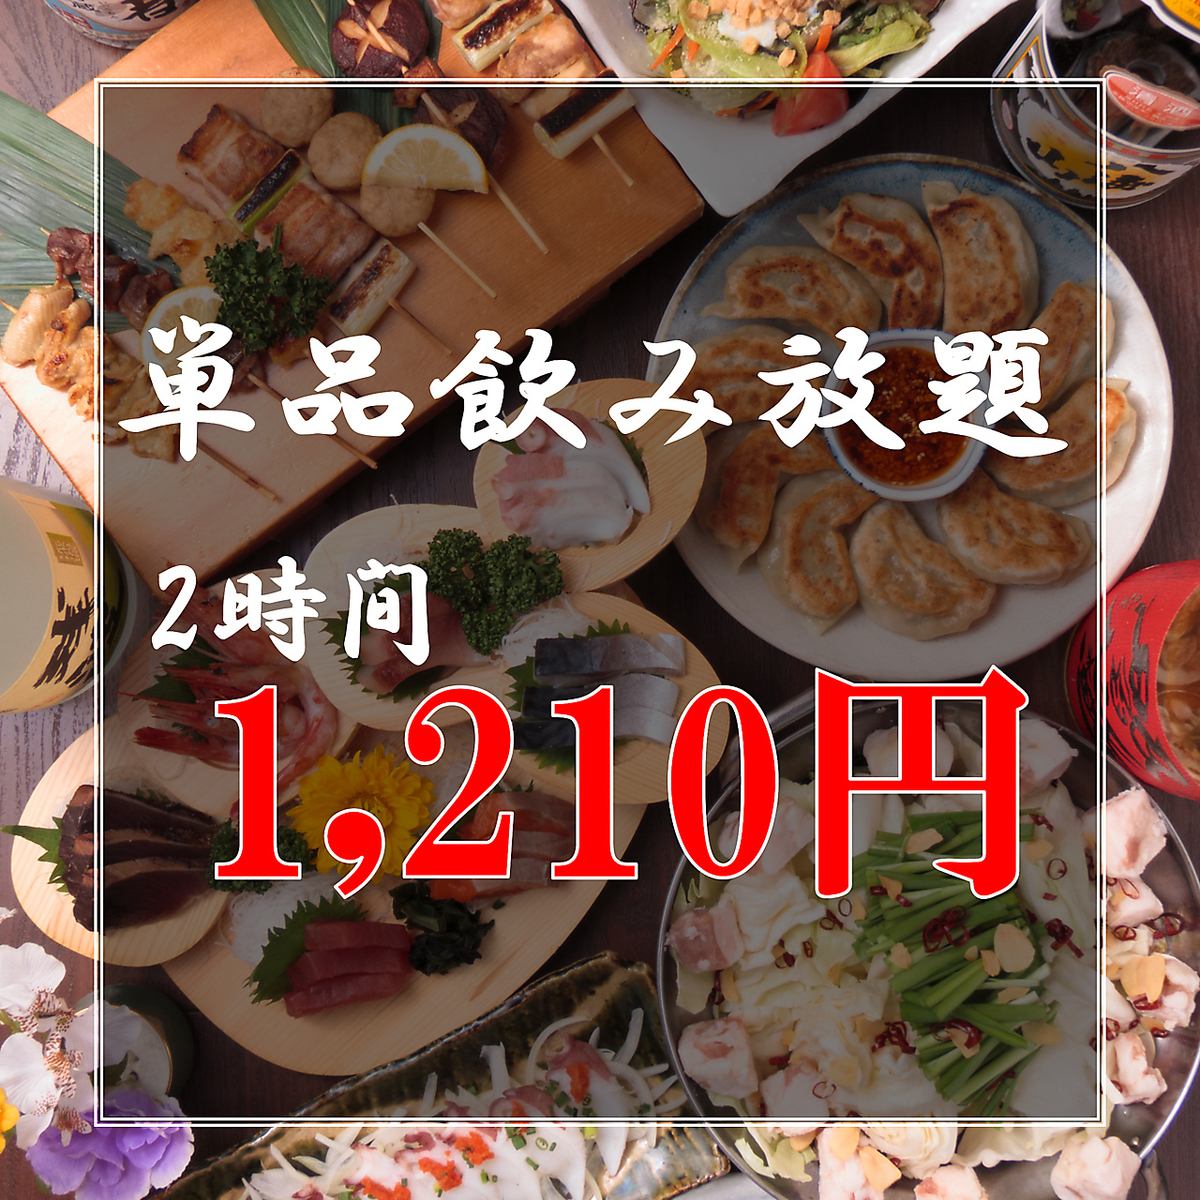 Lunch is welcome! All-you-can-drink for 2 hours is offered for 1,210 yen for a limited time!